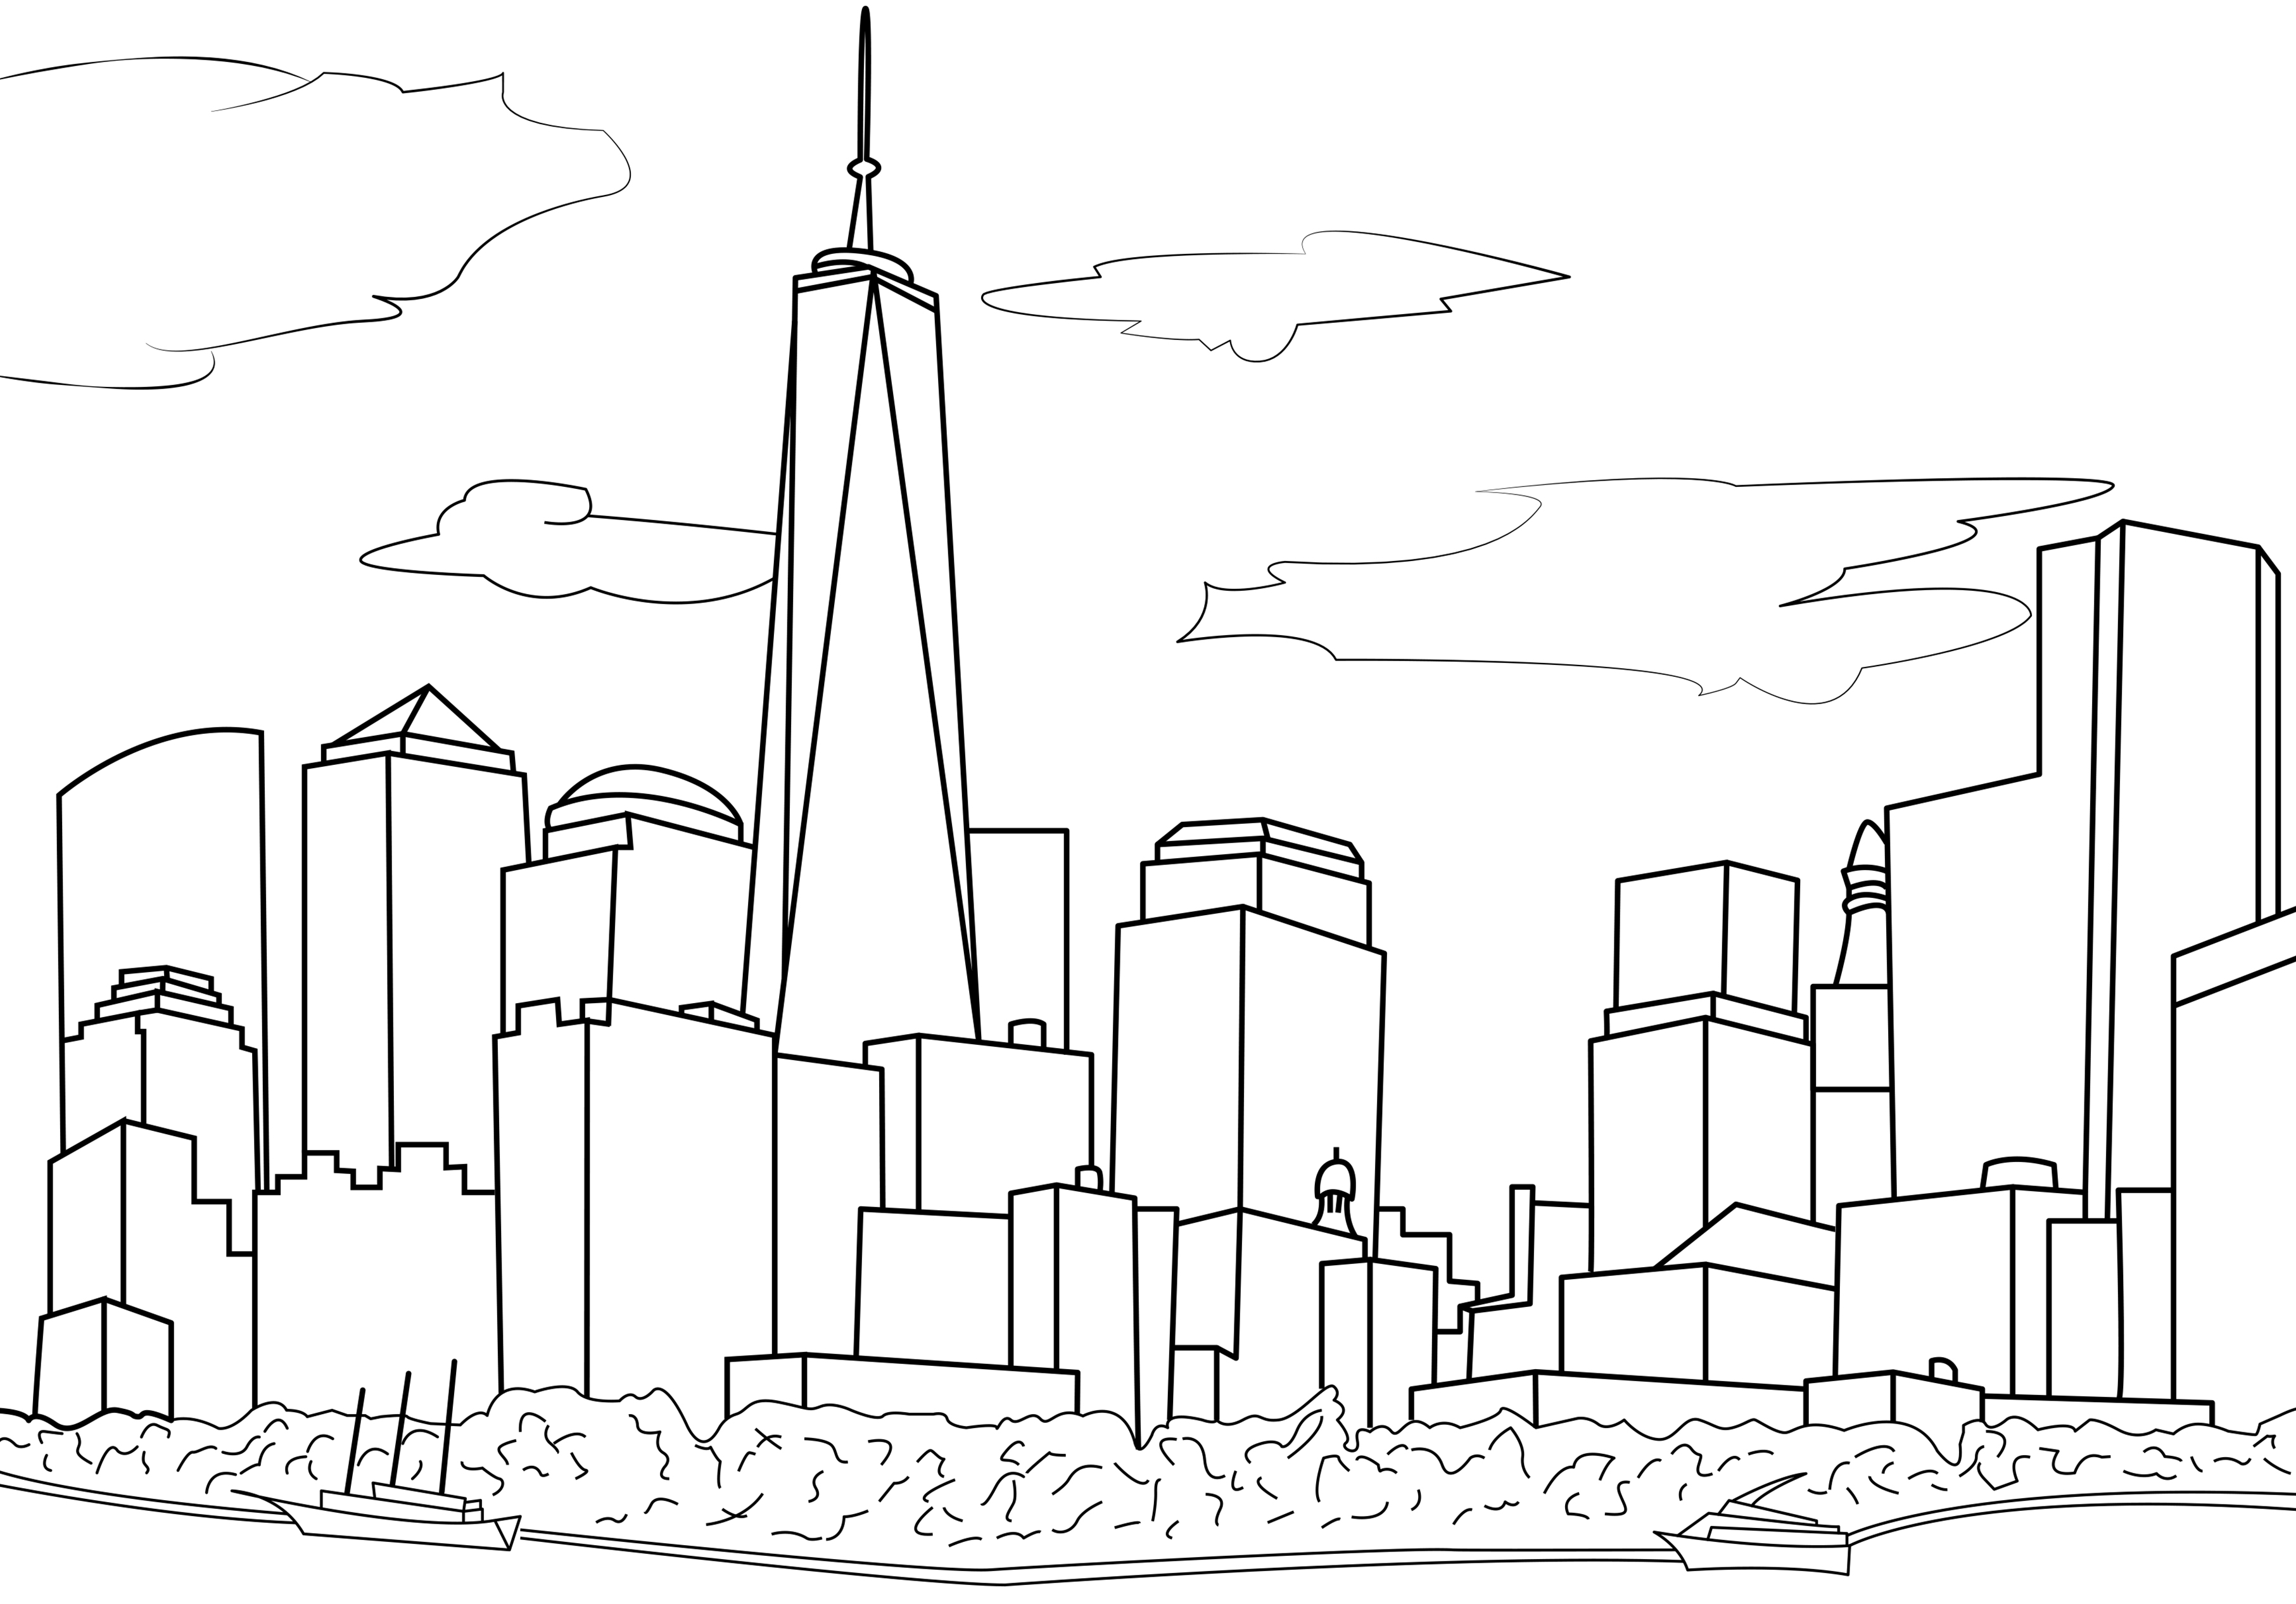 Simple drawing representing the New York skyline. The New York City skyline is iconic and recognizable around the world. It features many famous skyscrapers such as the Empire State Building, the Chrysler Building, and the One World Trade Center. In this drawing, we can only see the One World Trade Center other buildings are fictional.